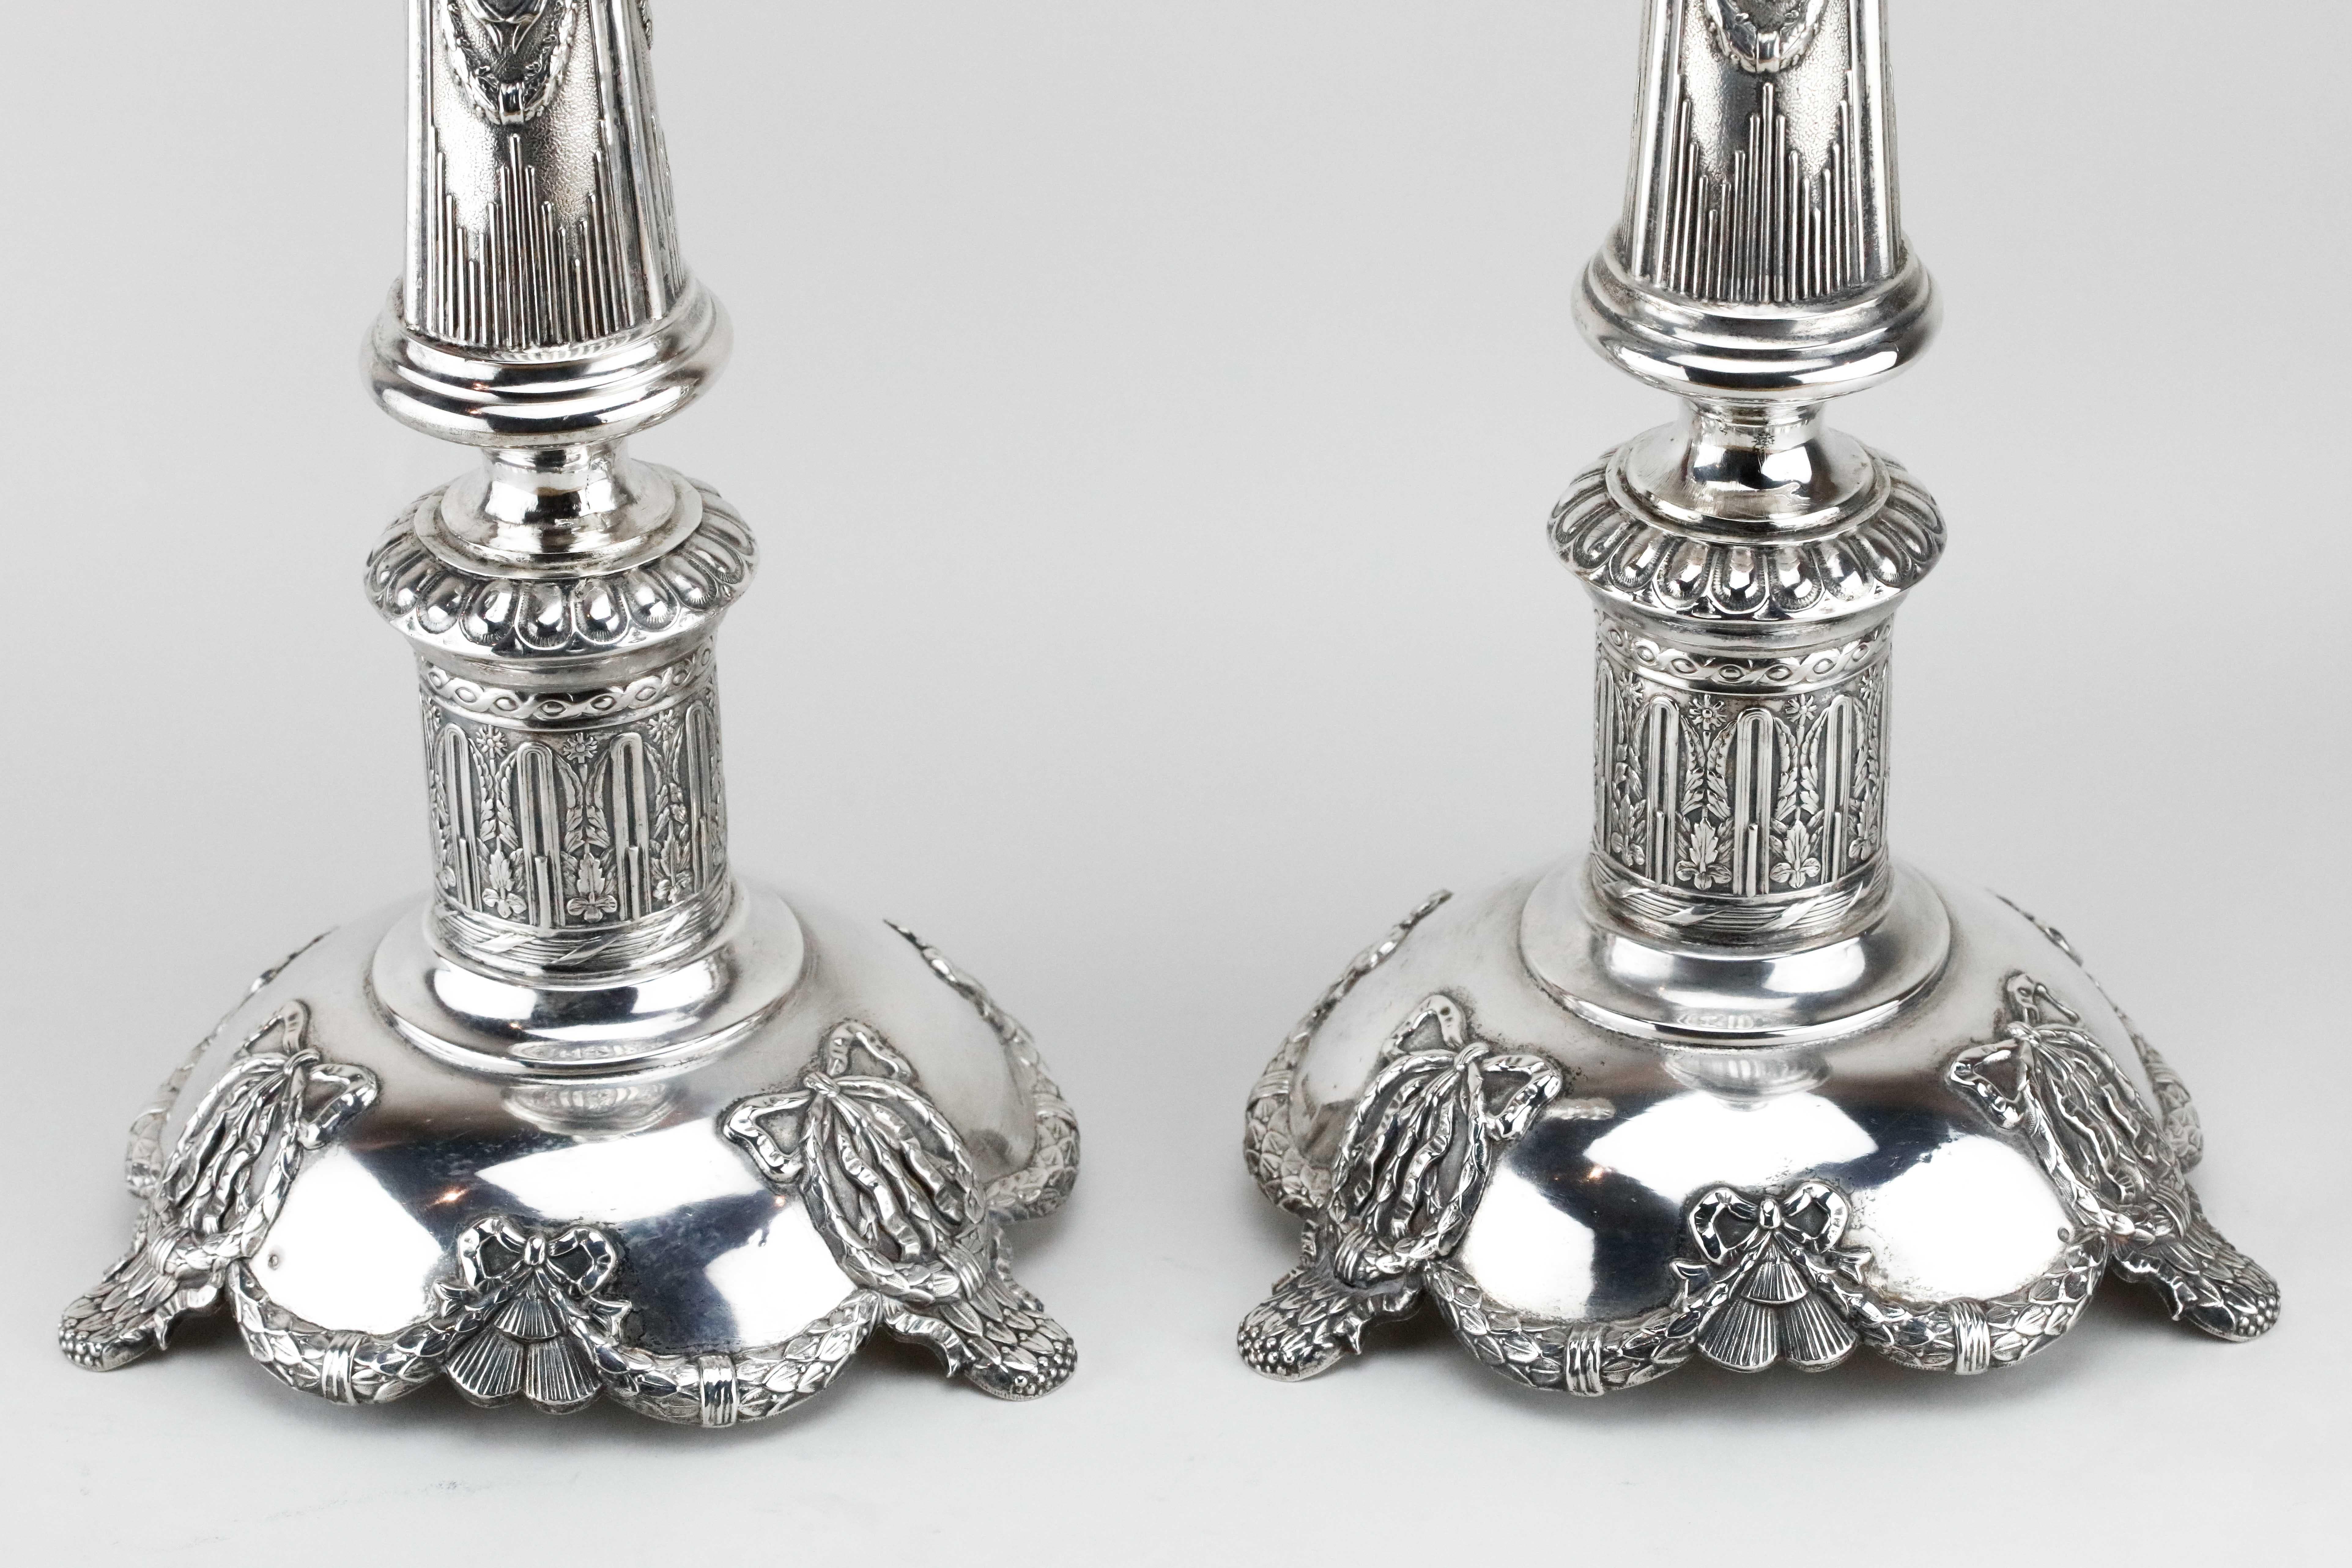 Large neoclassical silver Shabbat candlesticks, Isaac Szekman, Poland, circa 1880.
Beautifully chased with various ribbon and leaves ornaments in typical neoclassical design. Set on a wide, chased base.

Marked on the base with 